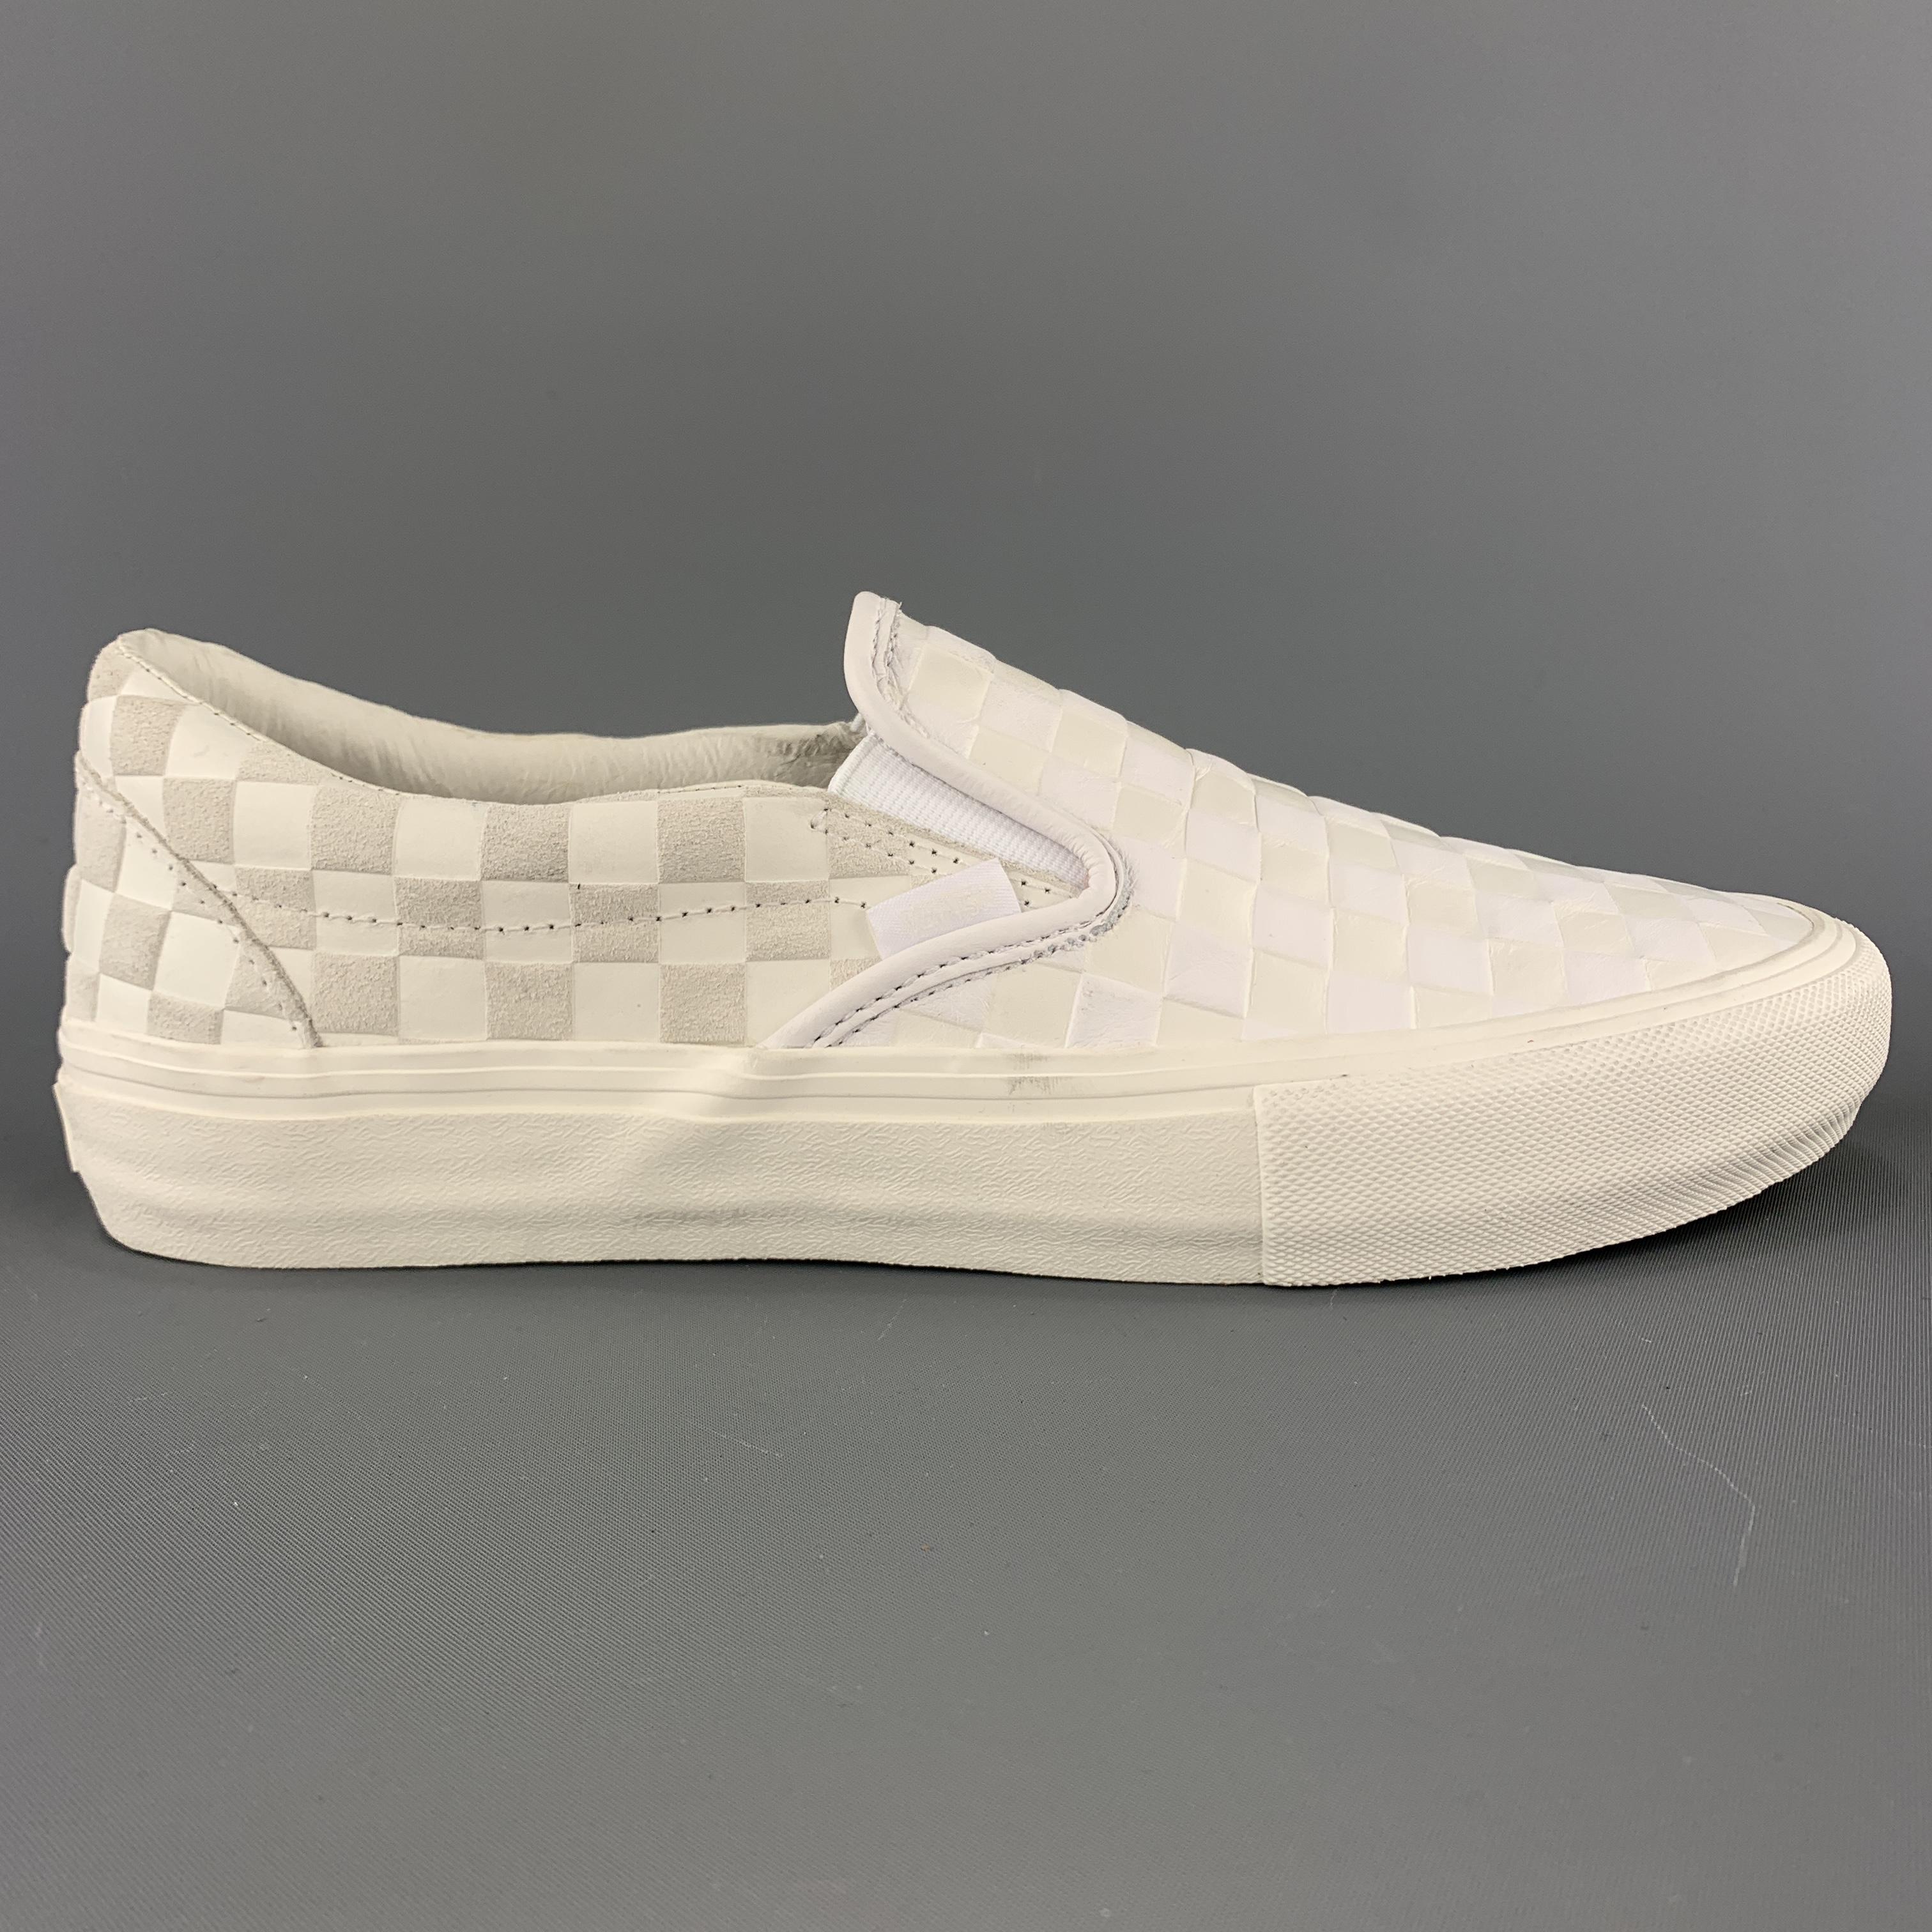 VANS x ENGINEERED GARMENTS Spring Summer 2019 slip on sneakers come in white checkered embossed leather with one sueded front panel, one sueded heel panel, and tonal rubber sole. With box. 

Excellent Pre-Owned Condition.. 
Marked: 9.5  